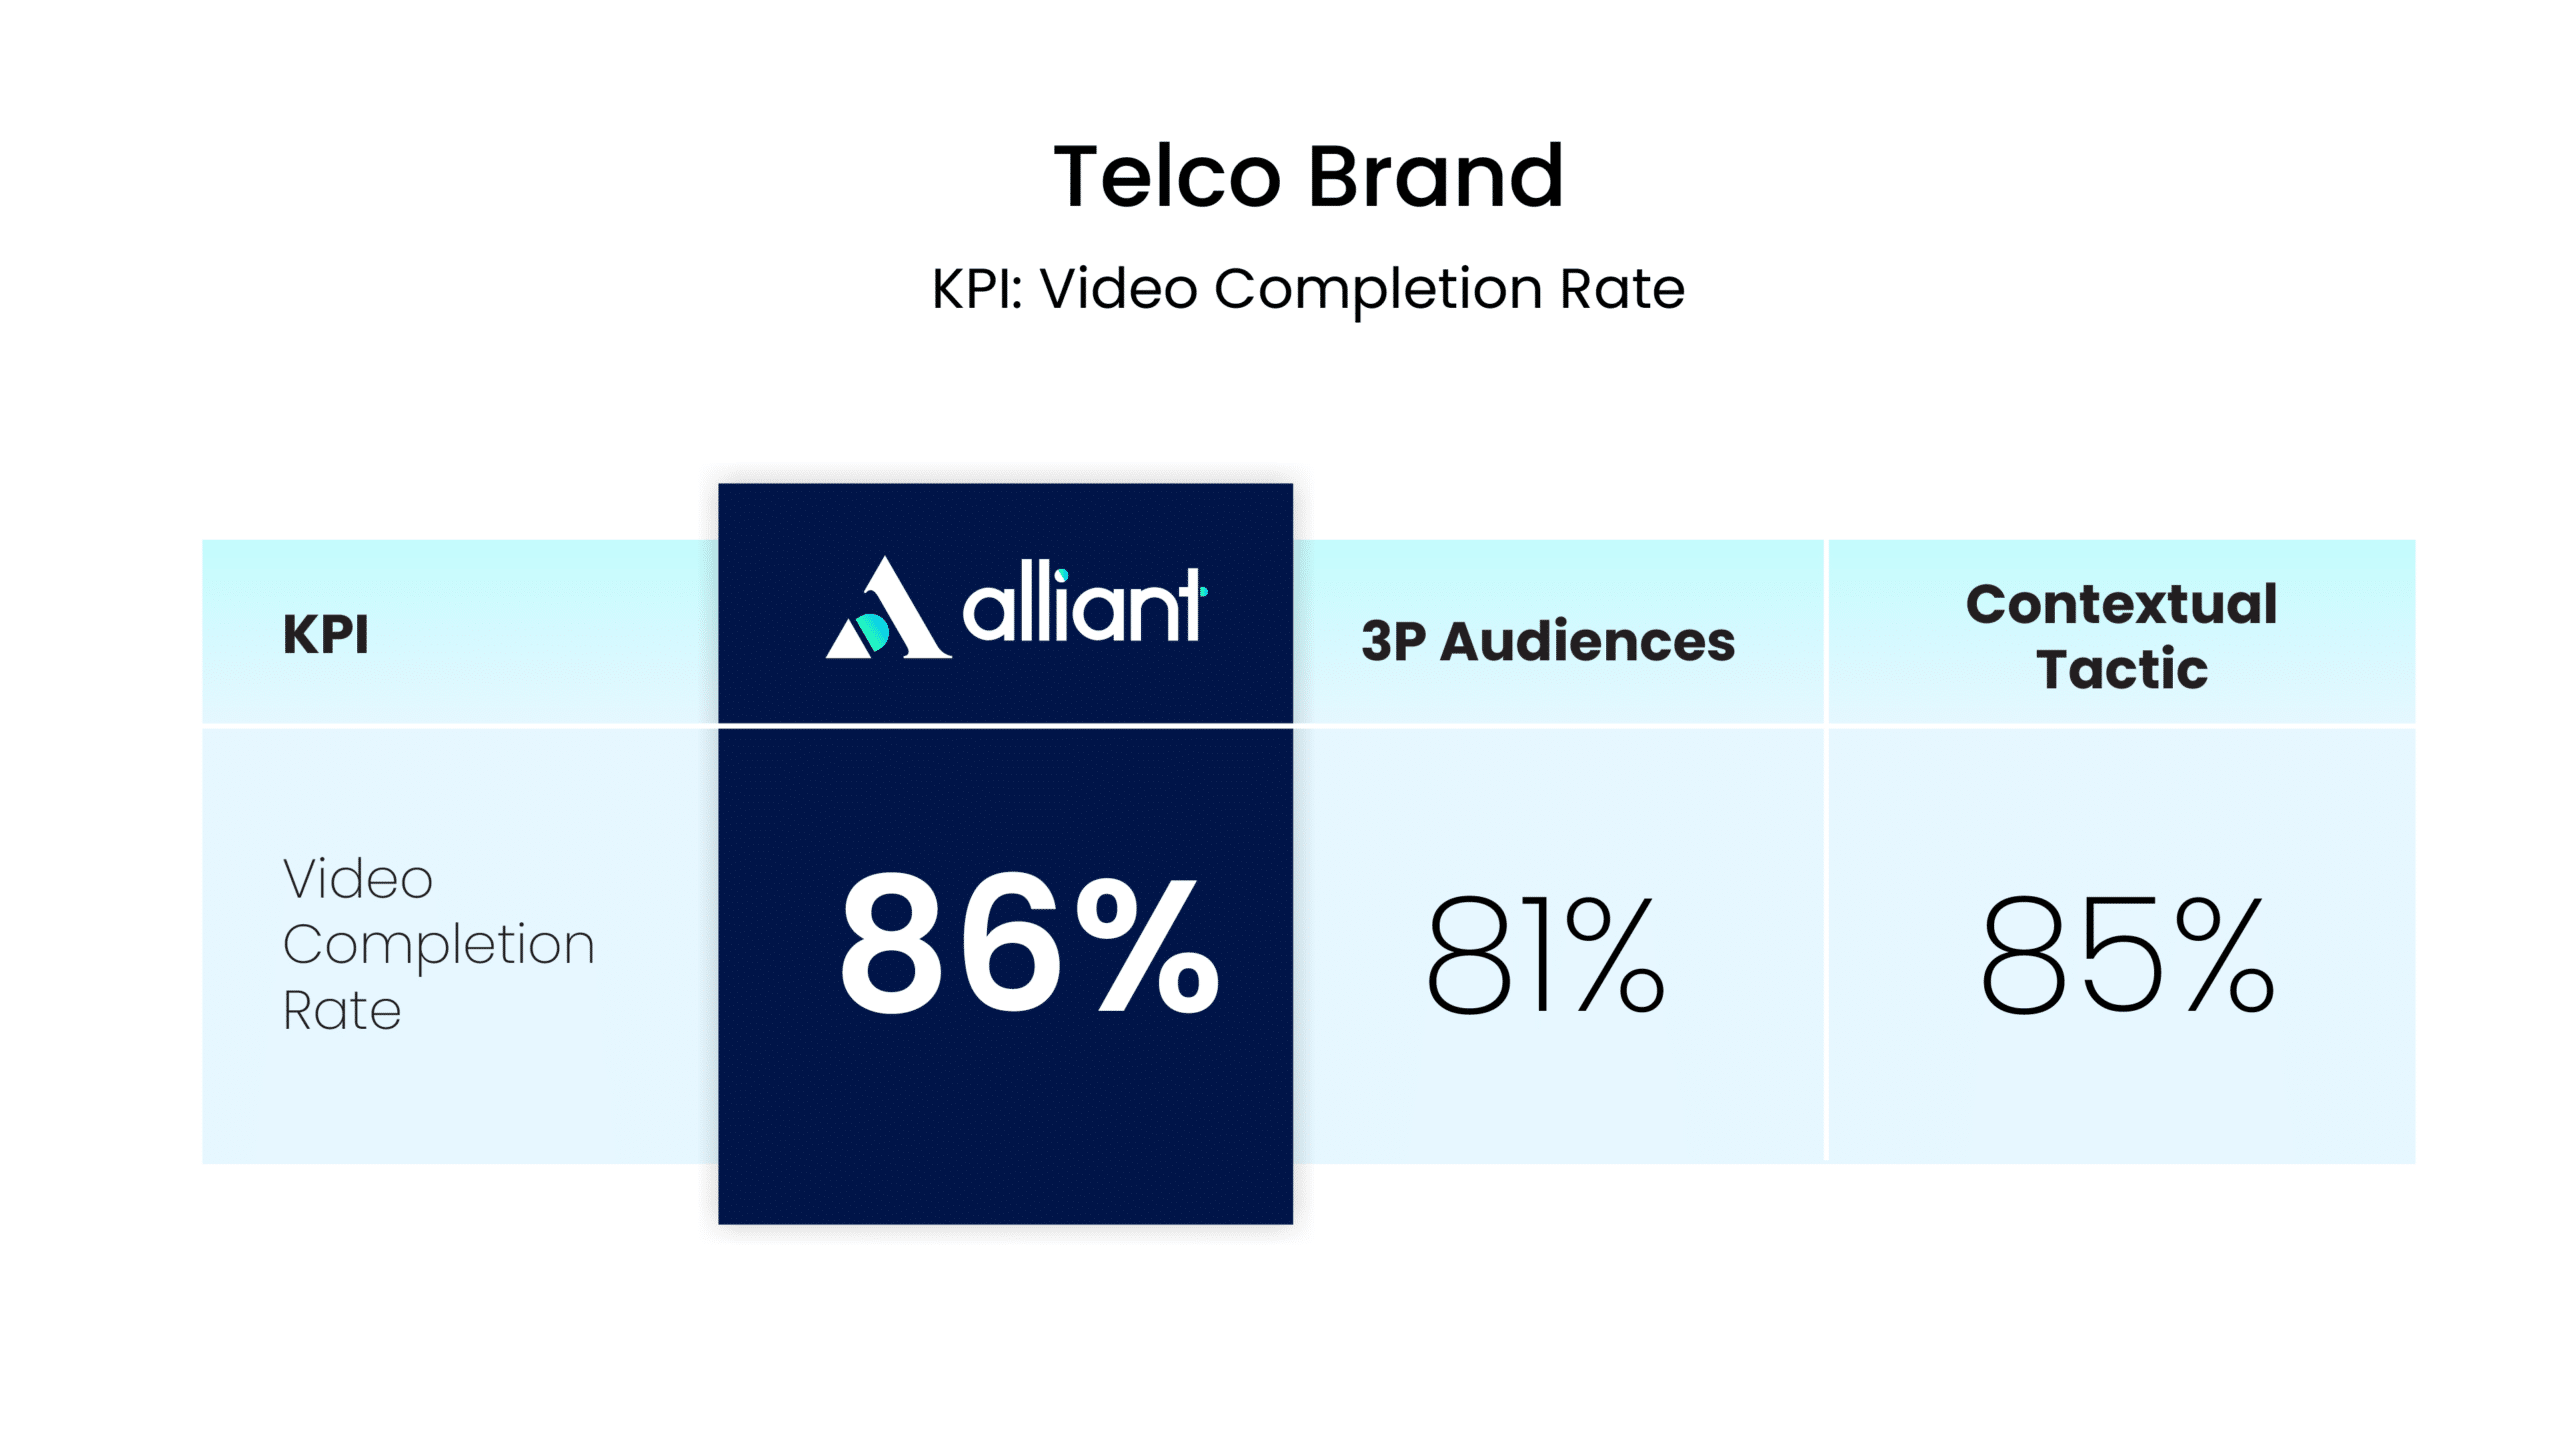 Statistic showing Alliant Video Completion Rate - 86%